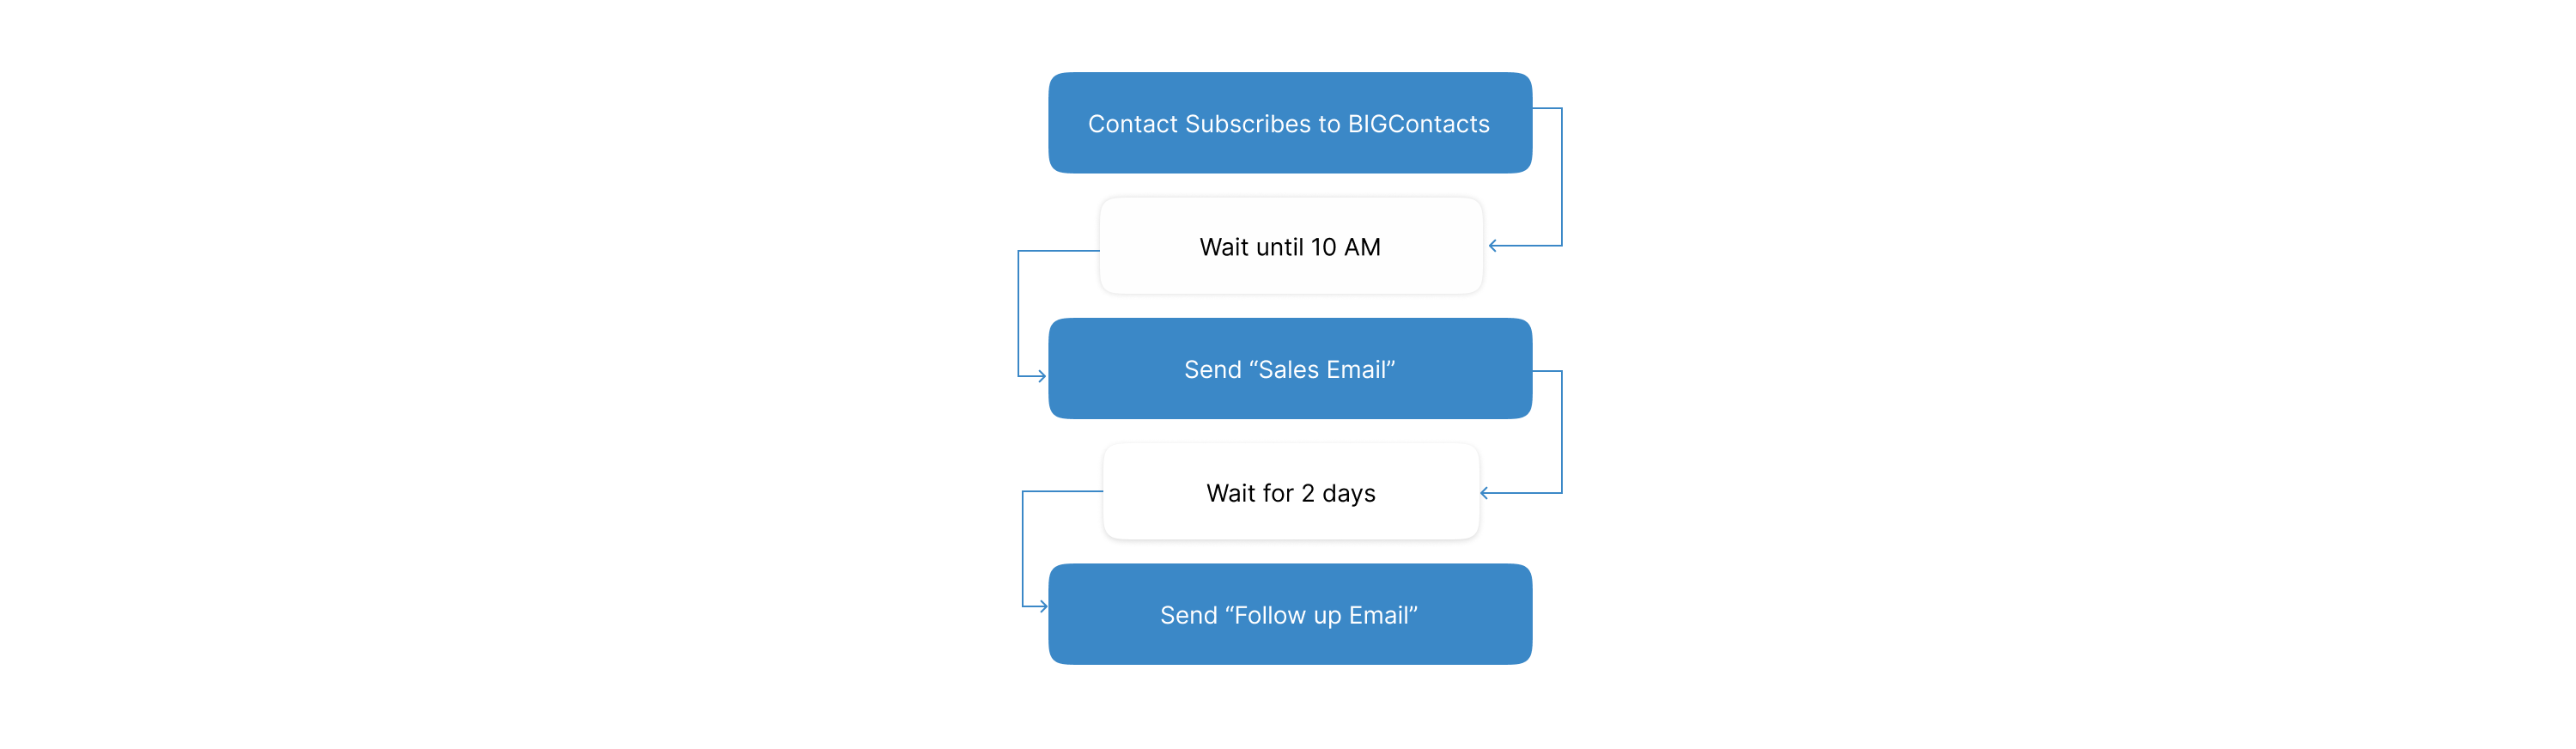 Email Sequence to nurture leads